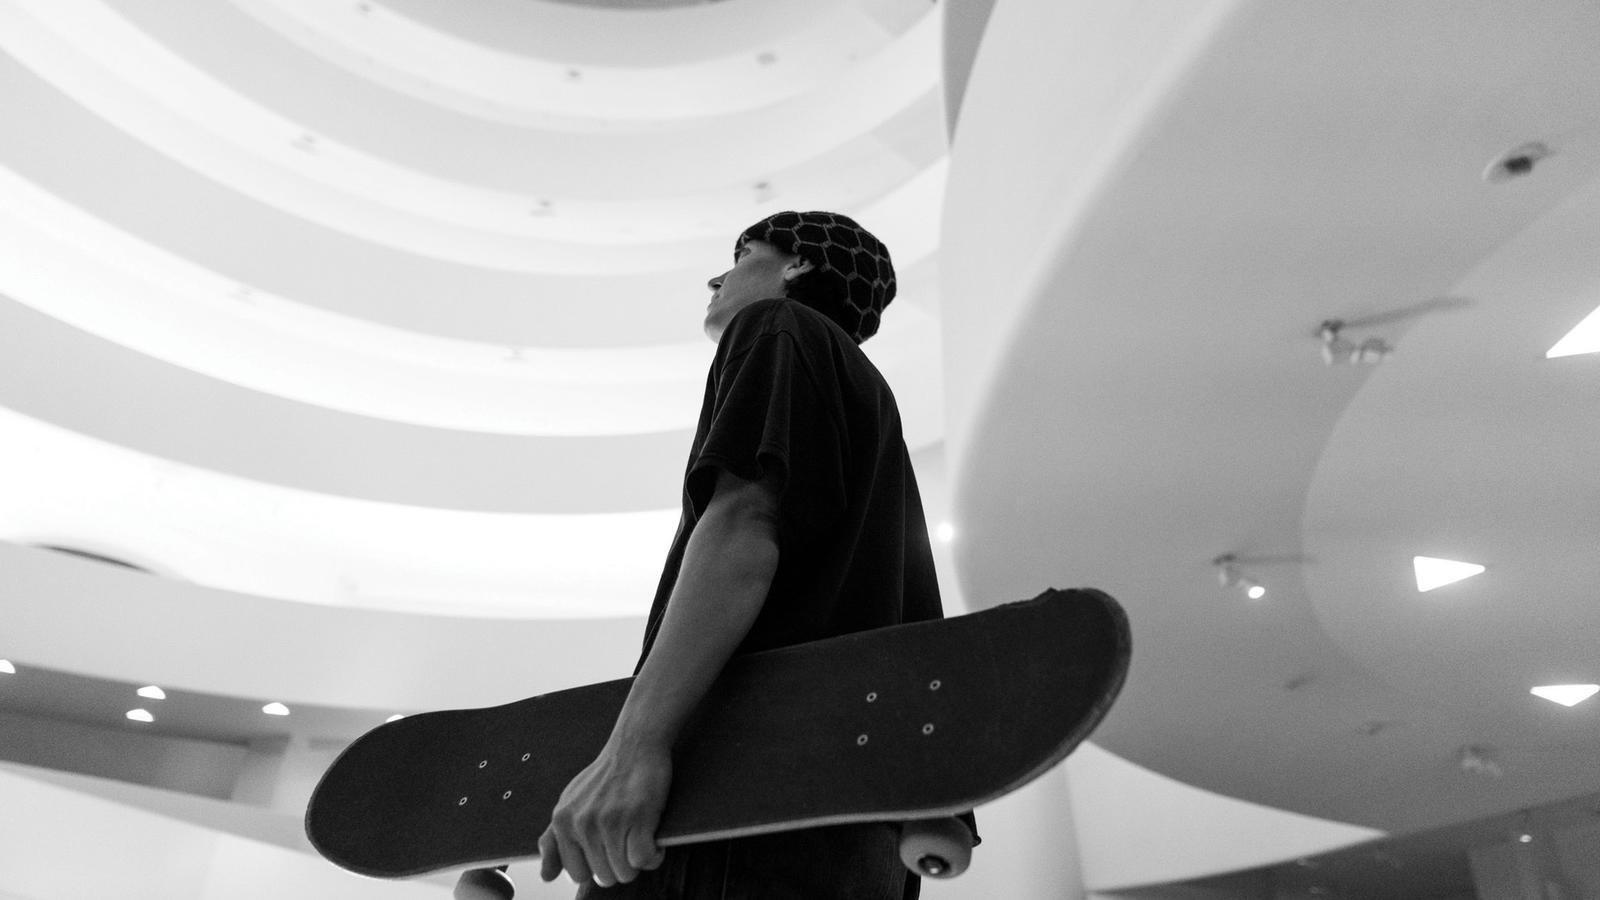 alexis sablone holding a skateboard in the Guggenheim